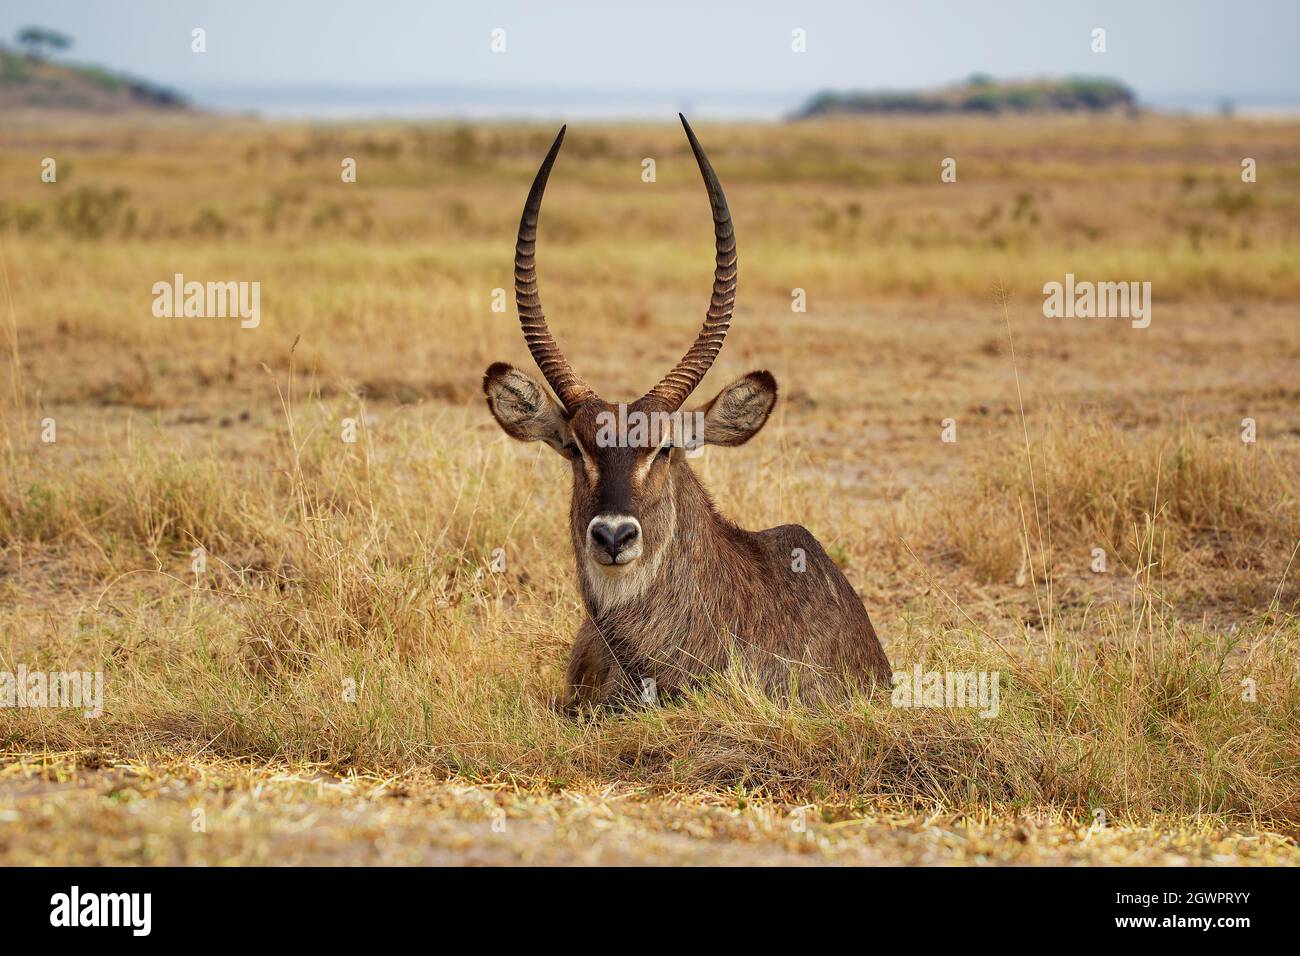 Common Waterbuck - Kobus ellipsiprymnus lying large horned antelope found widely in sub-Saharan Africa, placed in family Bovidae, face to face view, s Stock Photo